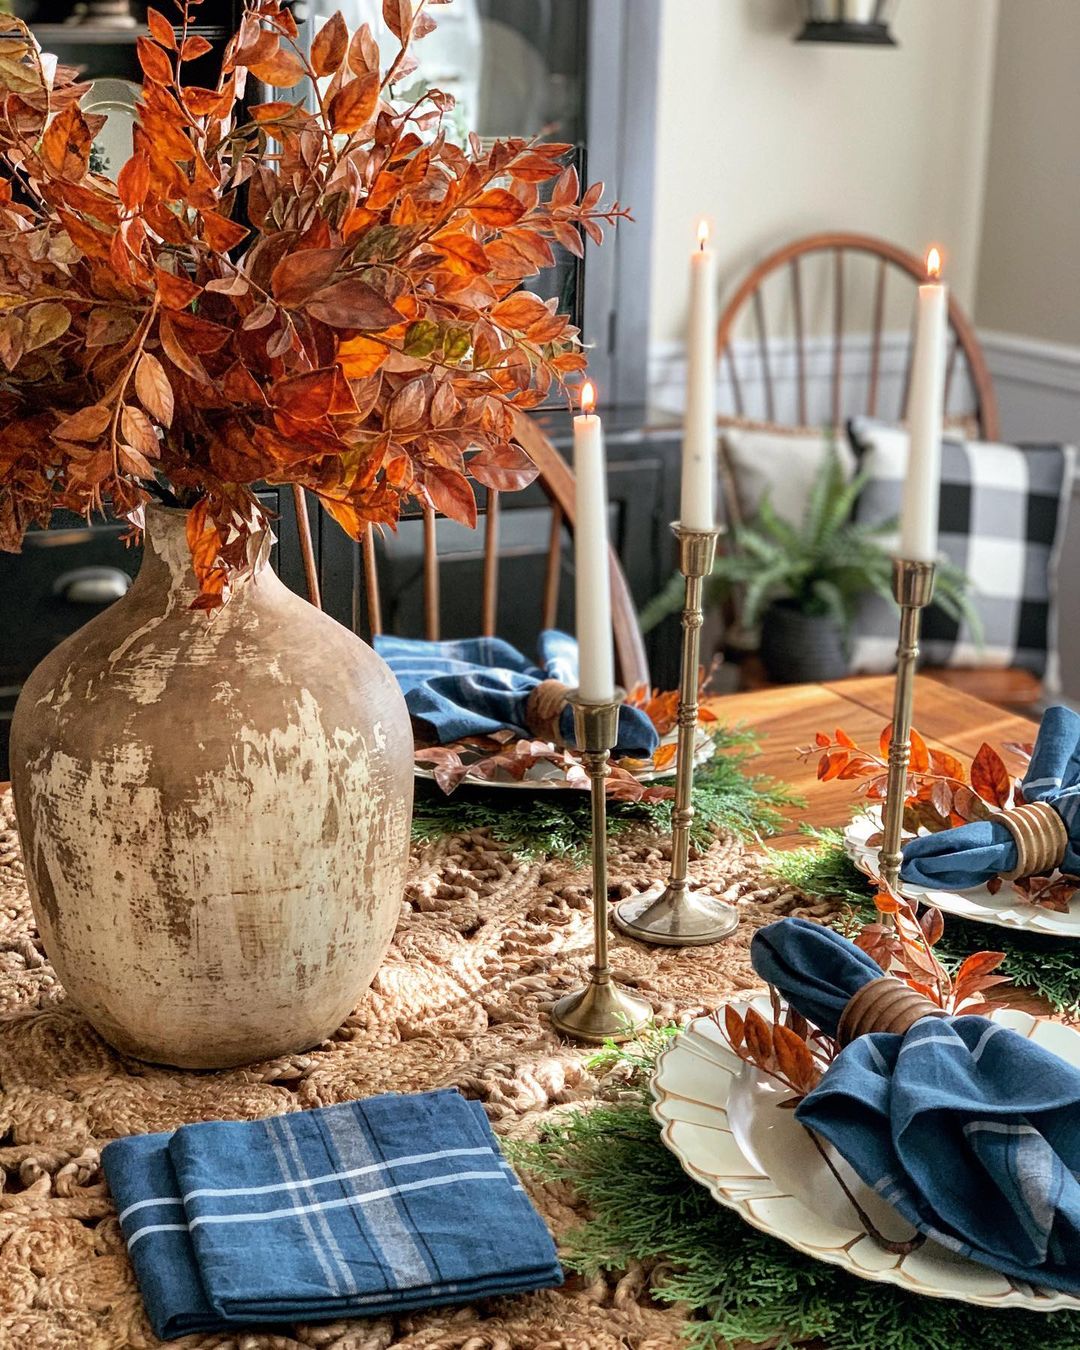 Rustic Romance: Captivating Fall Centerpieces with the Warmth of Candlelight